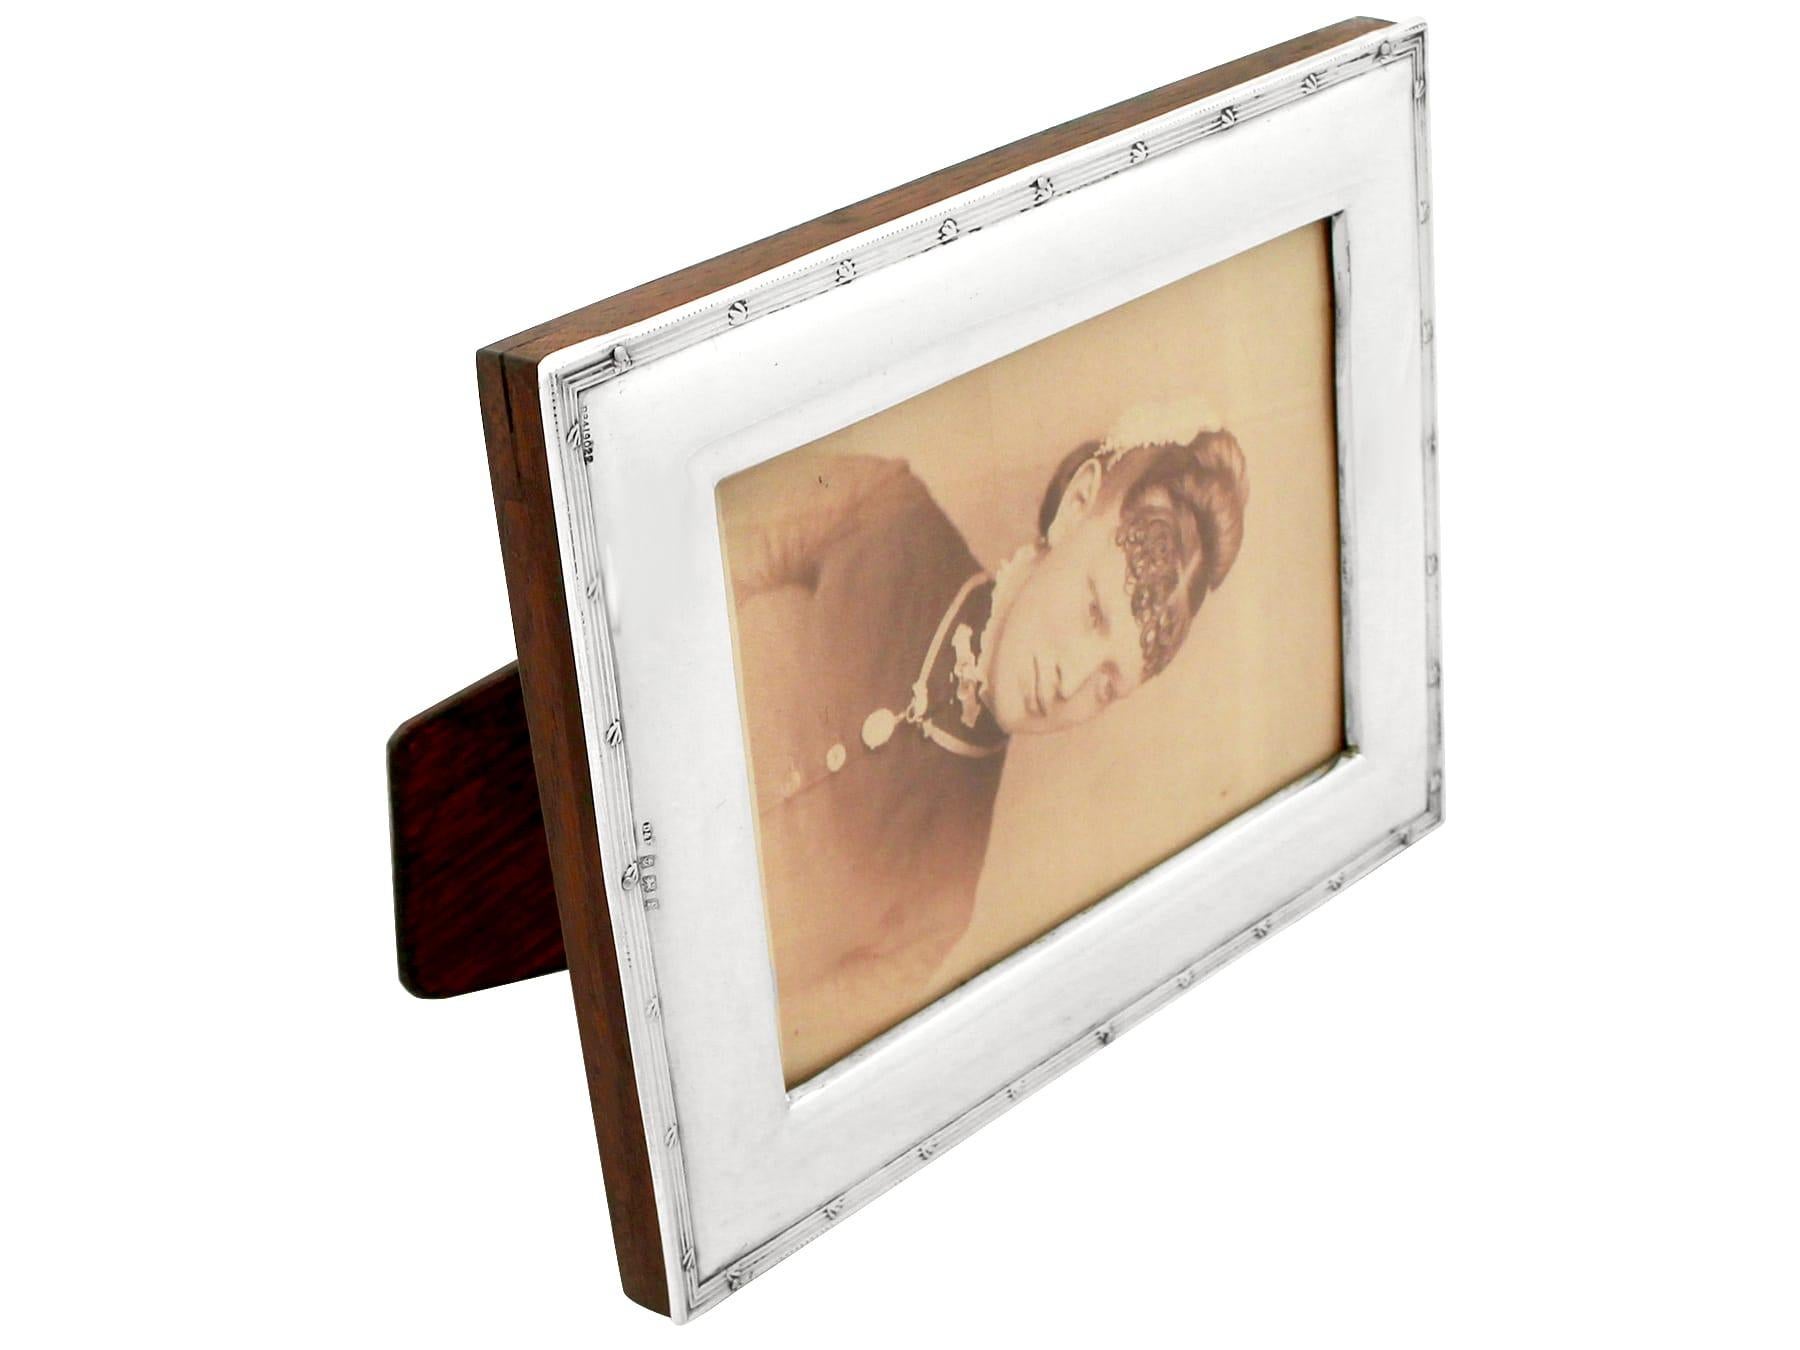 A fine and impressive antique Edwardian English sterling silver photograph frame, an addition to our ornamental silverware collection.

This fine antique Edwardian sterling silver photograph frame has a plain rectangular form.

The surface of